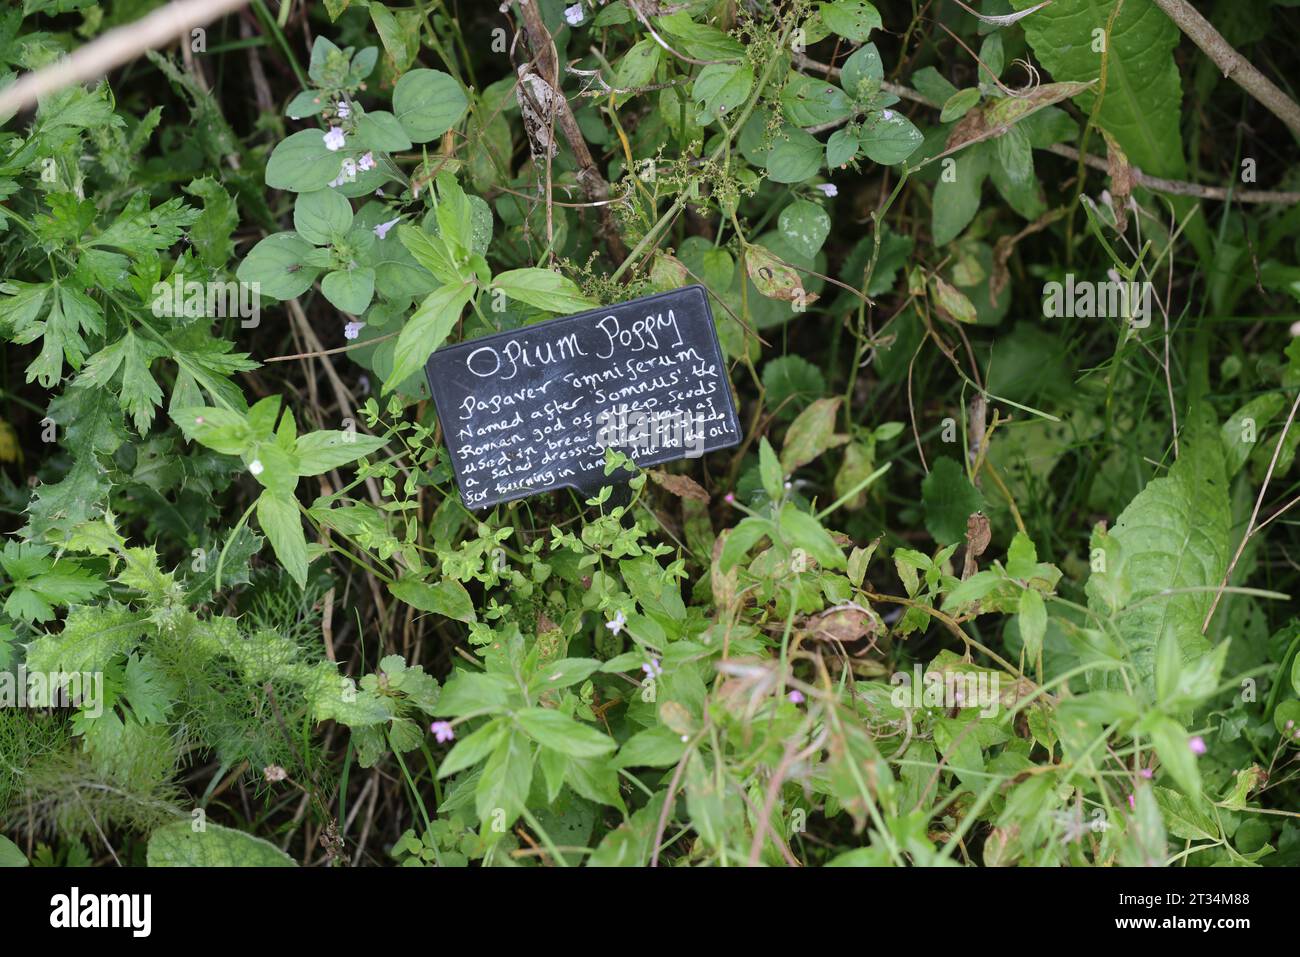 A selection of plant labels pictured next to growing plants at the Weald & Downland Museum in Chichester, West Sussex, UK. Stock Photo